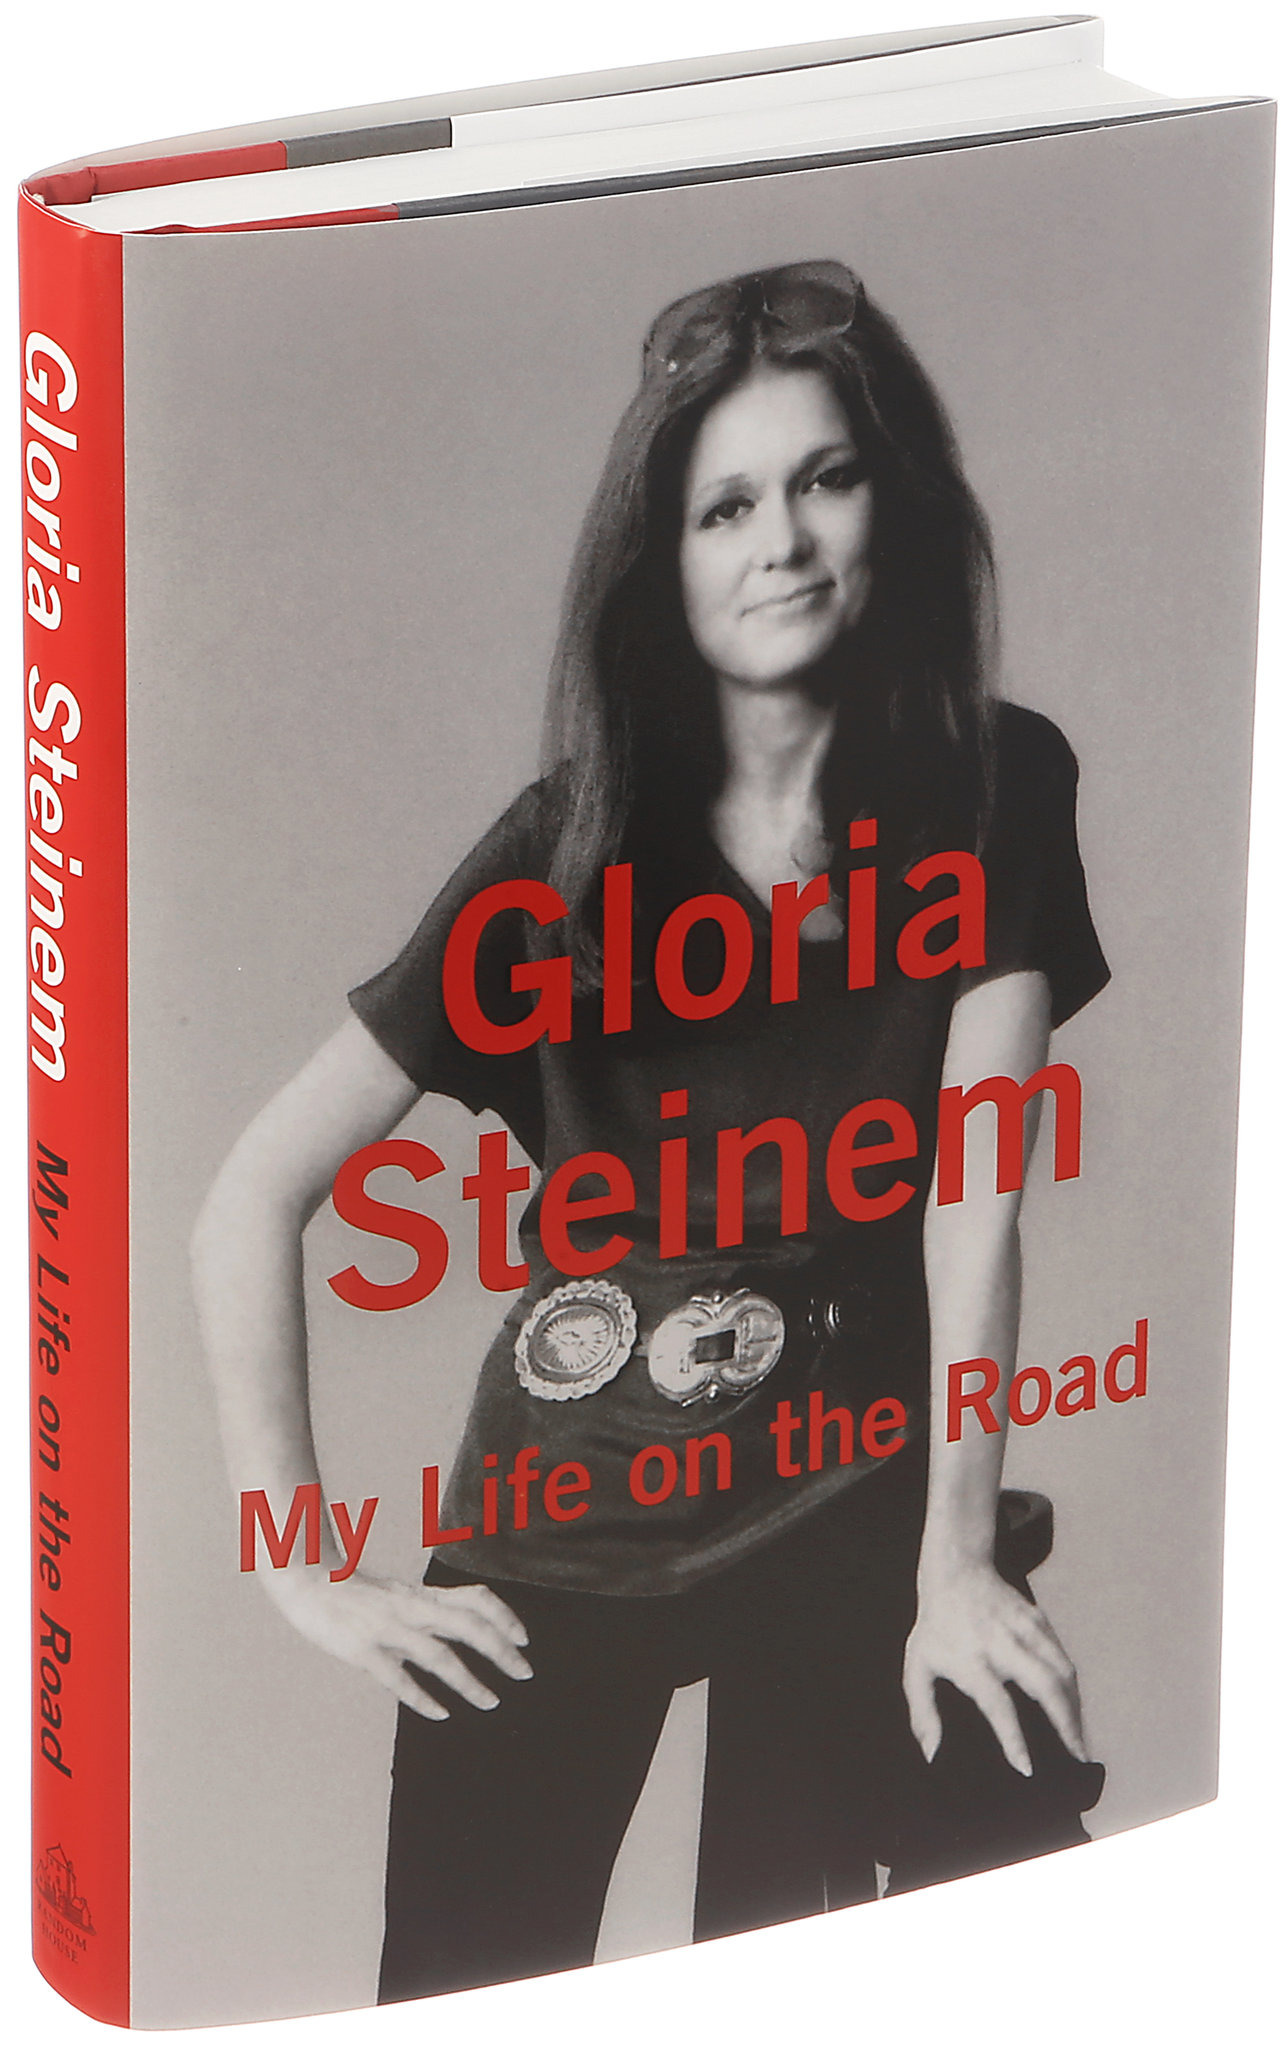 gloria steinem my life on the road travel book guide wanderlust solo female travel book tips reading list